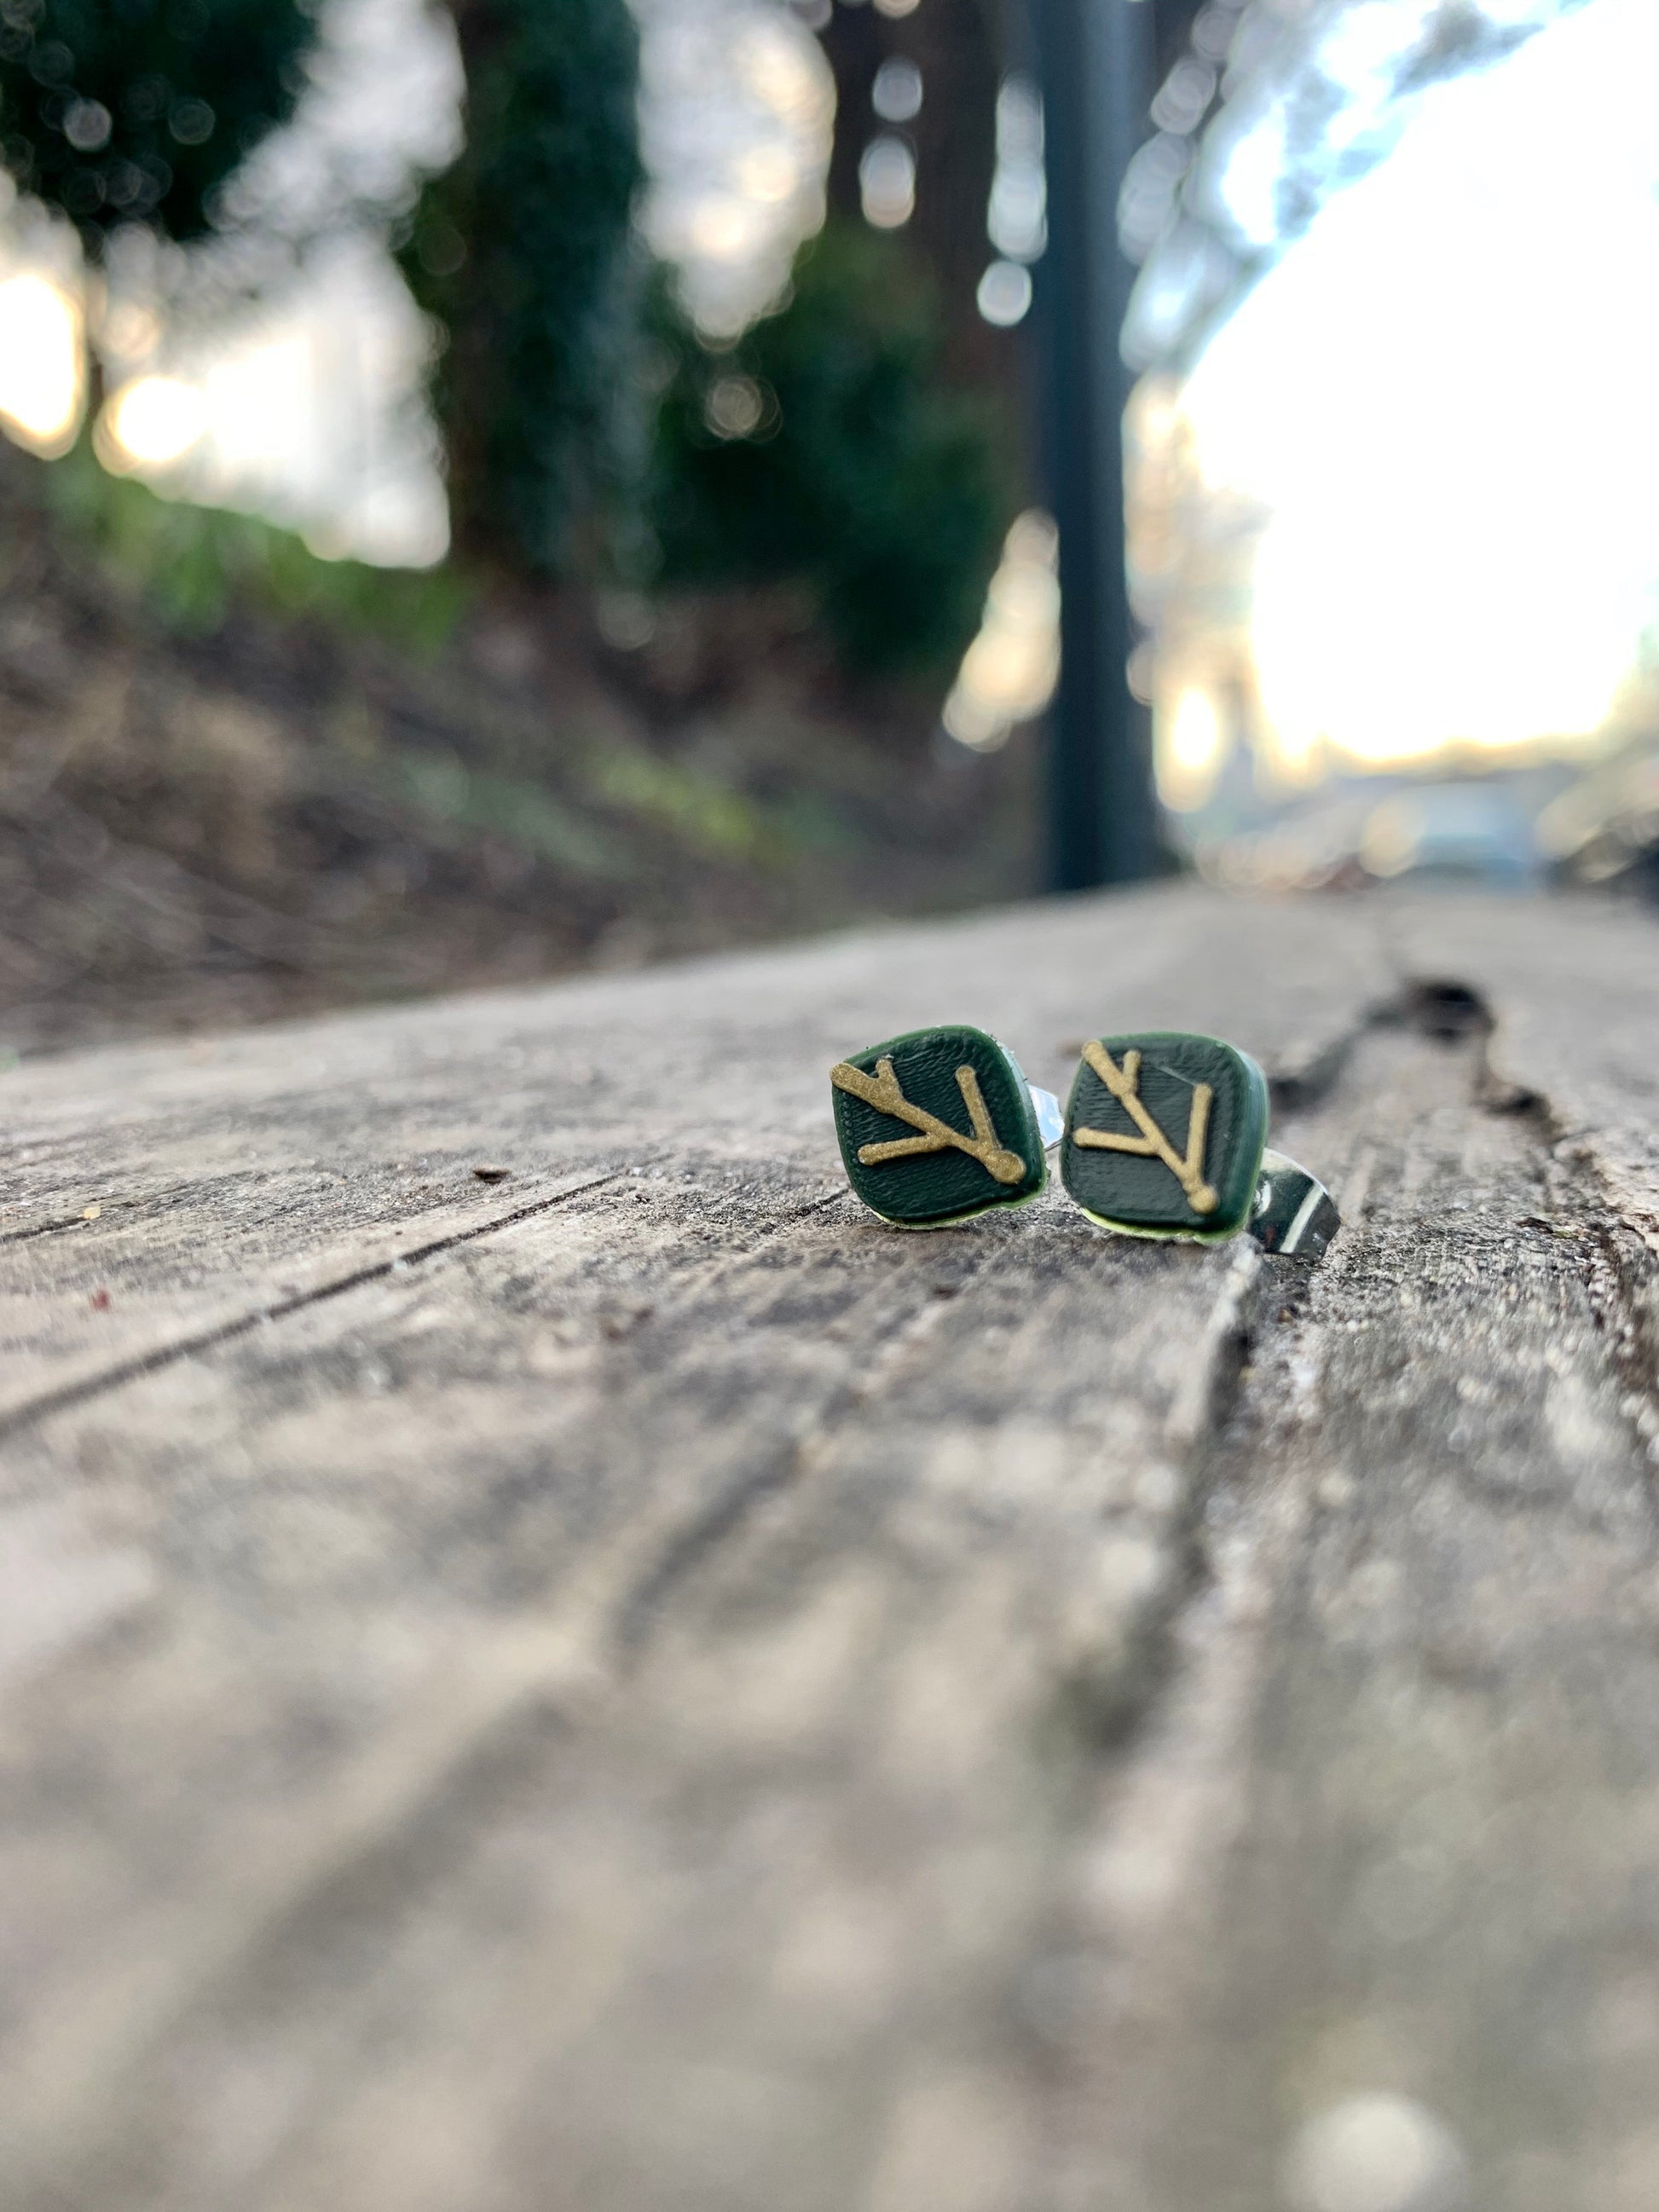 In focus are two R+D earrings shaped like leaves. They are olive green with gold veins. They are resting on weathered wood planks and there is a park blurry in the background.